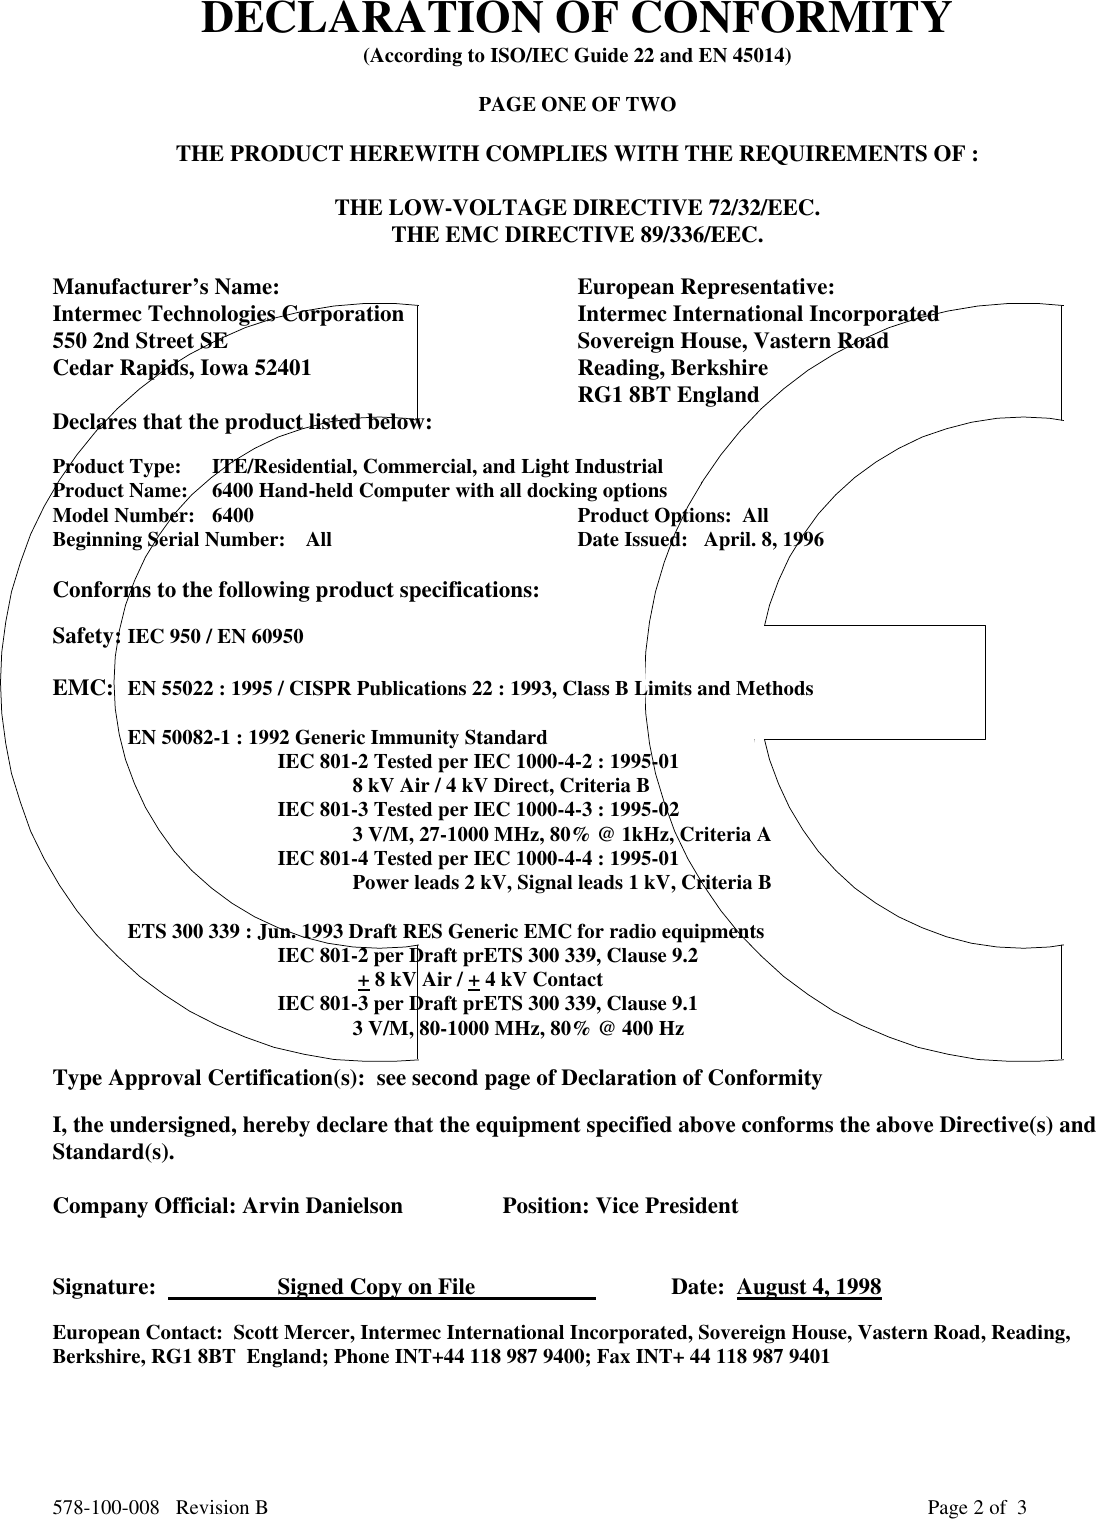 578-100-008   Revision B Page 2 of  3DECLARATION OF CONFORMITY(According to ISO/IEC Guide 22 and EN 45014)PAGE ONE OF TWOTHE PRODUCT HEREWITH COMPLIES WITH THE REQUIREMENTS OF :THE LOW-VOLTAGE DIRECTIVE 72/32/EEC.THE EMC DIRECTIVE 89/336/EEC.Manufacturer’s Name: European Representative:Intermec Technologies Corporation Intermec International Incorporated550 2nd Street SE Sovereign House, Vastern RoadCedar Rapids, Iowa 52401 Reading, BerkshireRG1 8BT EnglandDeclares that the product listed below:Product Type: ITE/Residential, Commercial, and Light IndustrialProduct Name:   6400 Hand-held Computer with all docking optionsModel Number: 6400 Product Options:  AllBeginning Serial Number: All   Date Issued:   April. 8, 1996Conforms to the following product specifications:Safety: IEC 950 / EN 60950EMC: EN 55022 : 1995 / CISPR Publications 22 : 1993, Class B Limits and MethodsEN 50082-1 : 1992 Generic Immunity StandardIEC 801-2 Tested per IEC 1000-4-2 : 1995-01 8 kV Air / 4 kV Direct, Criteria BIEC 801-3 Tested per IEC 1000-4-3 : 1995-023 V/M, 27-1000 MHz, 80% @ 1kHz, Criteria AIEC 801-4 Tested per IEC 1000-4-4 : 1995-01Power leads 2 kV, Signal leads 1 kV, Criteria BETS 300 339 : Jun. 1993 Draft RES Generic EMC for radio equipmentsIEC 801-2 per Draft prETS 300 339, Clause 9.2 + 8 kV Air / + 4 kV ContactIEC 801-3 per Draft prETS 300 339, Clause 9.13 V/M, 80-1000 MHz, 80% @ 400 HzType Approval Certification(s):  see second page of Declaration of ConformityI, the undersigned, hereby declare that the equipment specified above conforms the above Directive(s) andStandard(s).Company Official: Arvin Danielson Position: Vice PresidentSignature:                      Signed Copy on File                      Date:  August 4, 1998European Contact:  Scott Mercer, Intermec International Incorporated, Sovereign House, Vastern Road, Reading,Berkshire, RG1 8BT  England; Phone INT+44 118 987 9400; Fax INT+ 44 118 987 9401